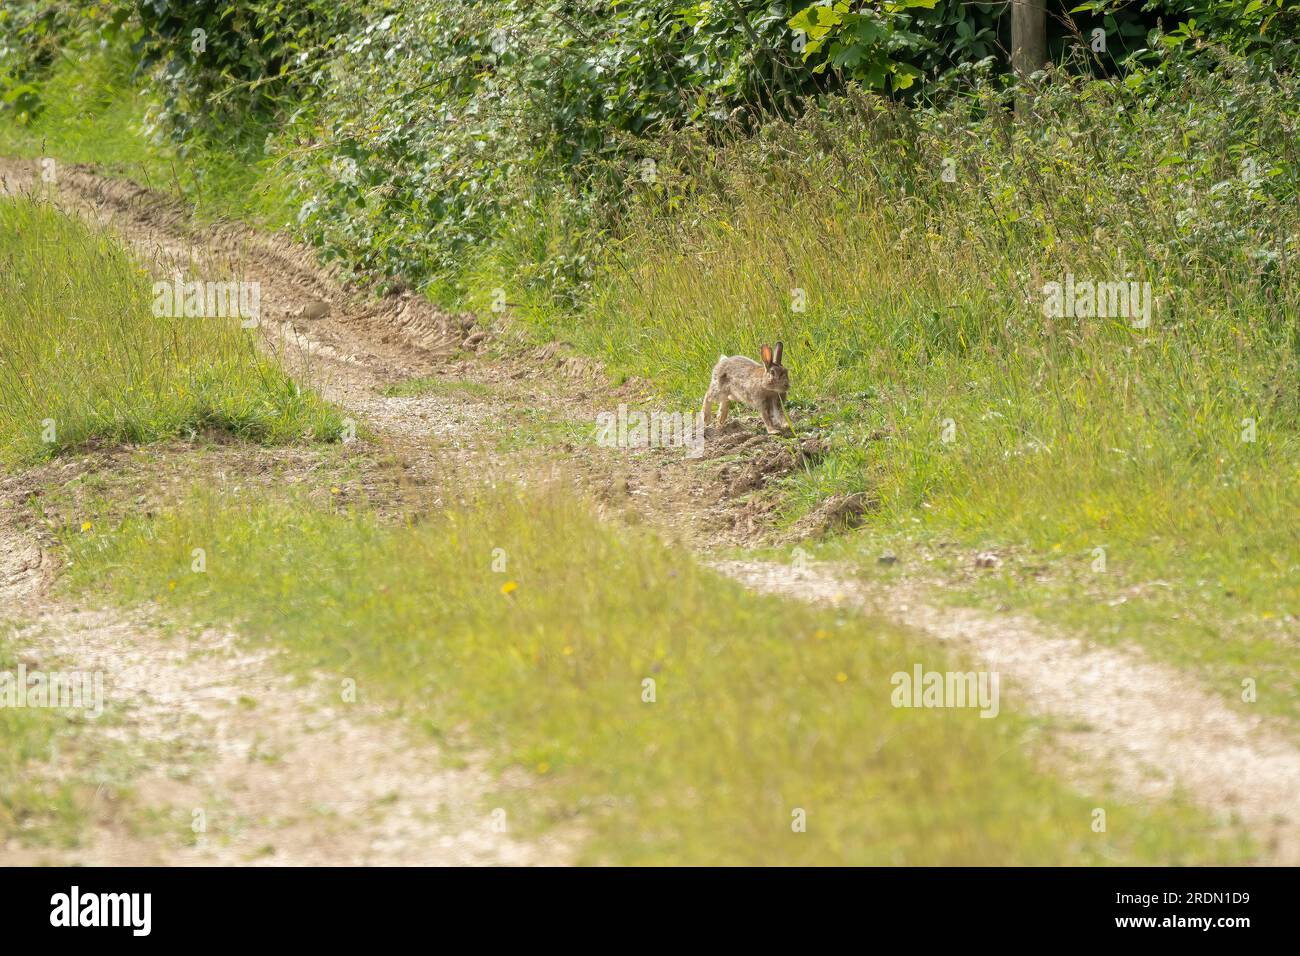 a wild young rabbit (Oryctolagus cuniculus) with brown fur glistening in the sunshine Stock Photo